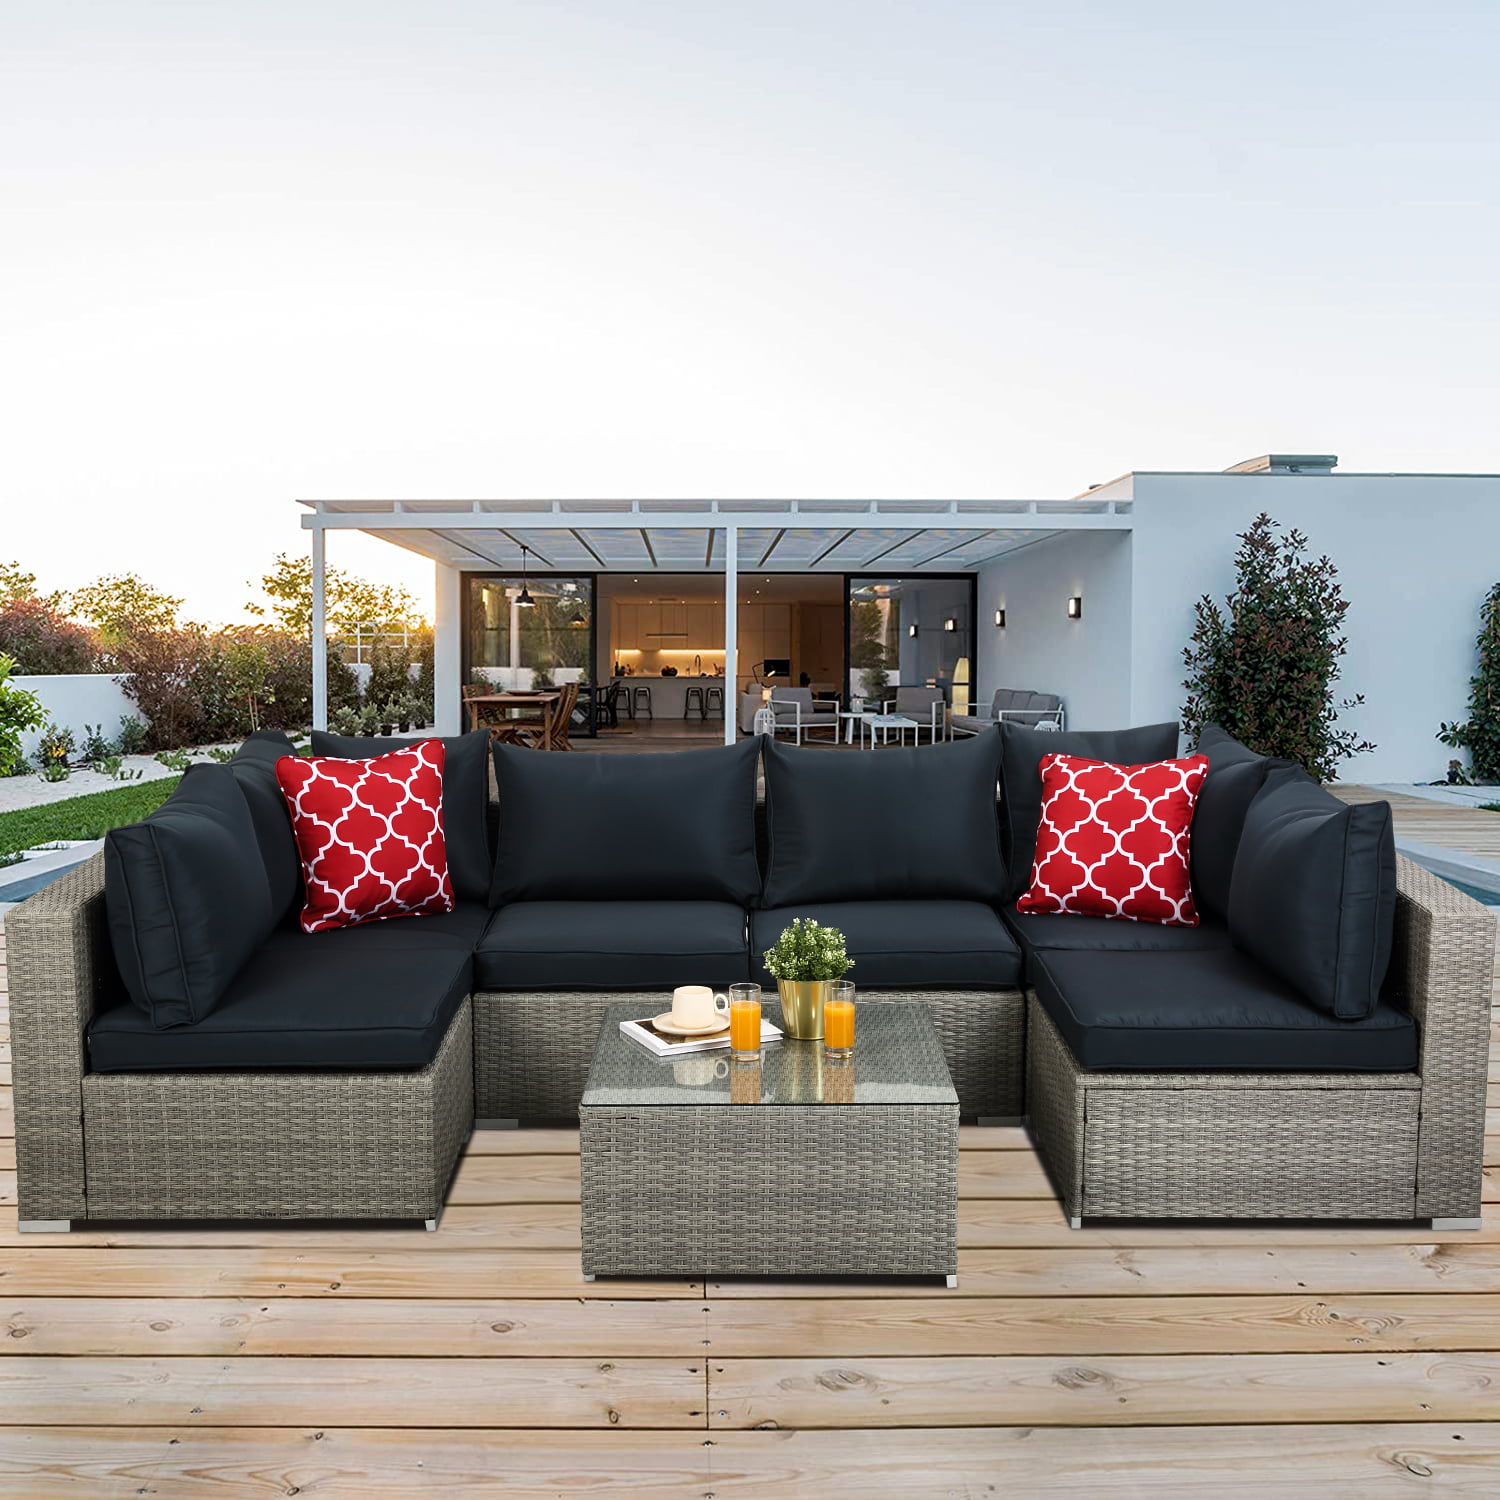 Wicker Patio Furniture Sectional Set Cushions Chair Cushion Chaise Lounge Indoor 